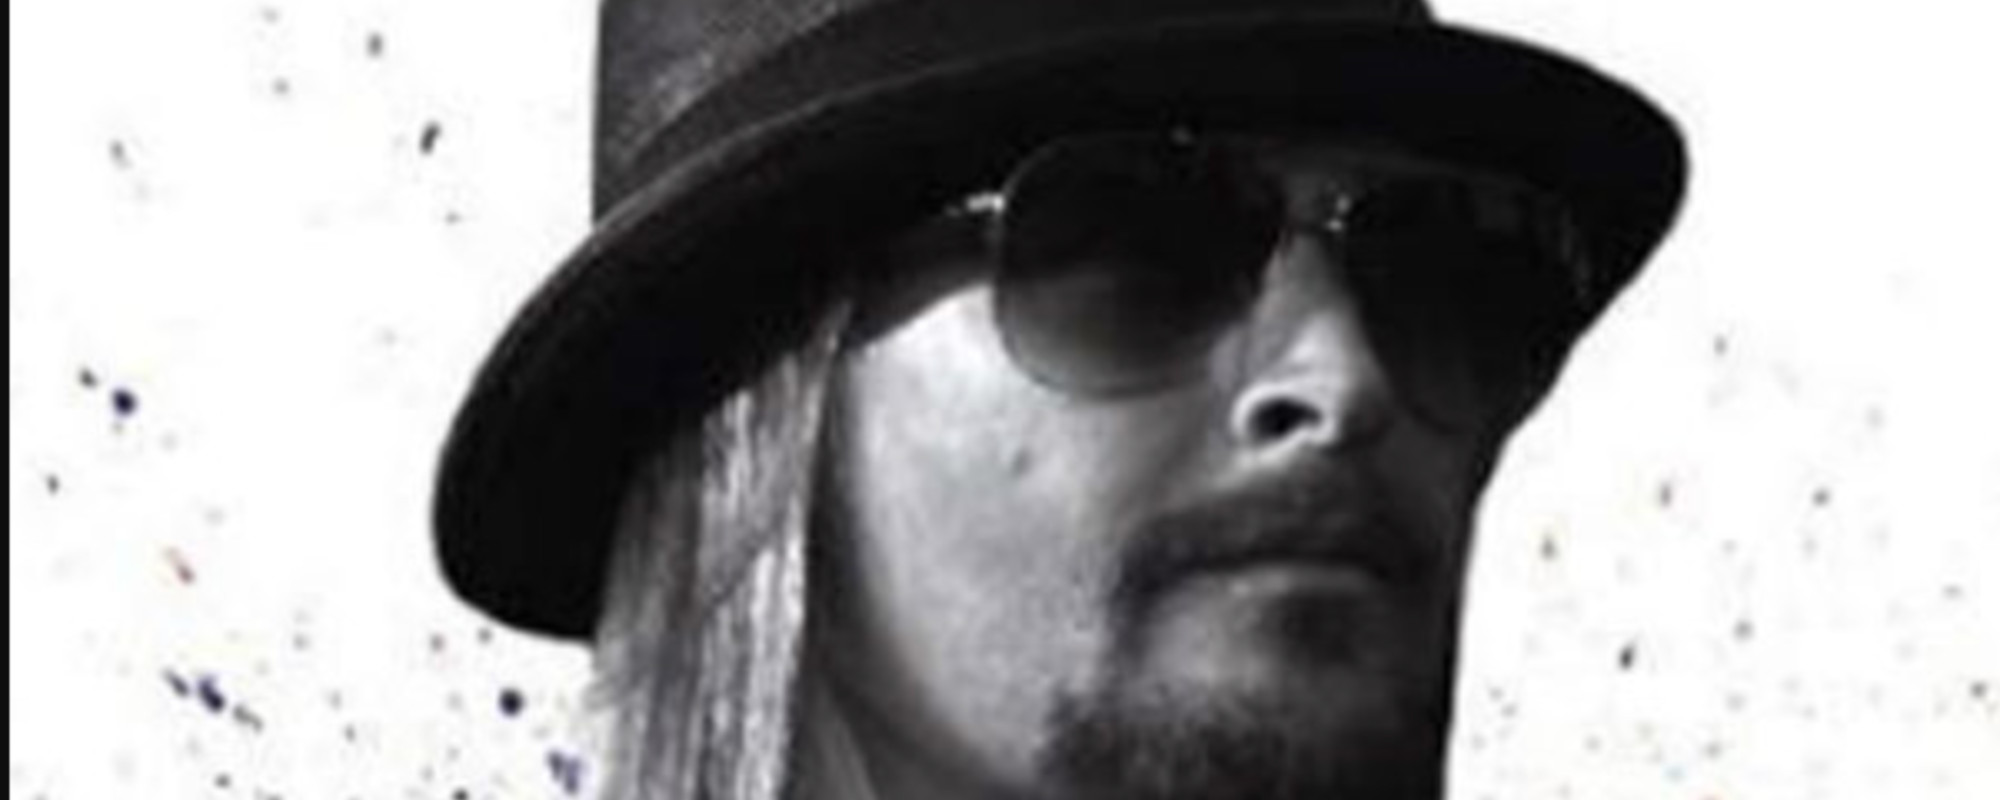 Kid Rock Touts Family in Latest Twitter Posts